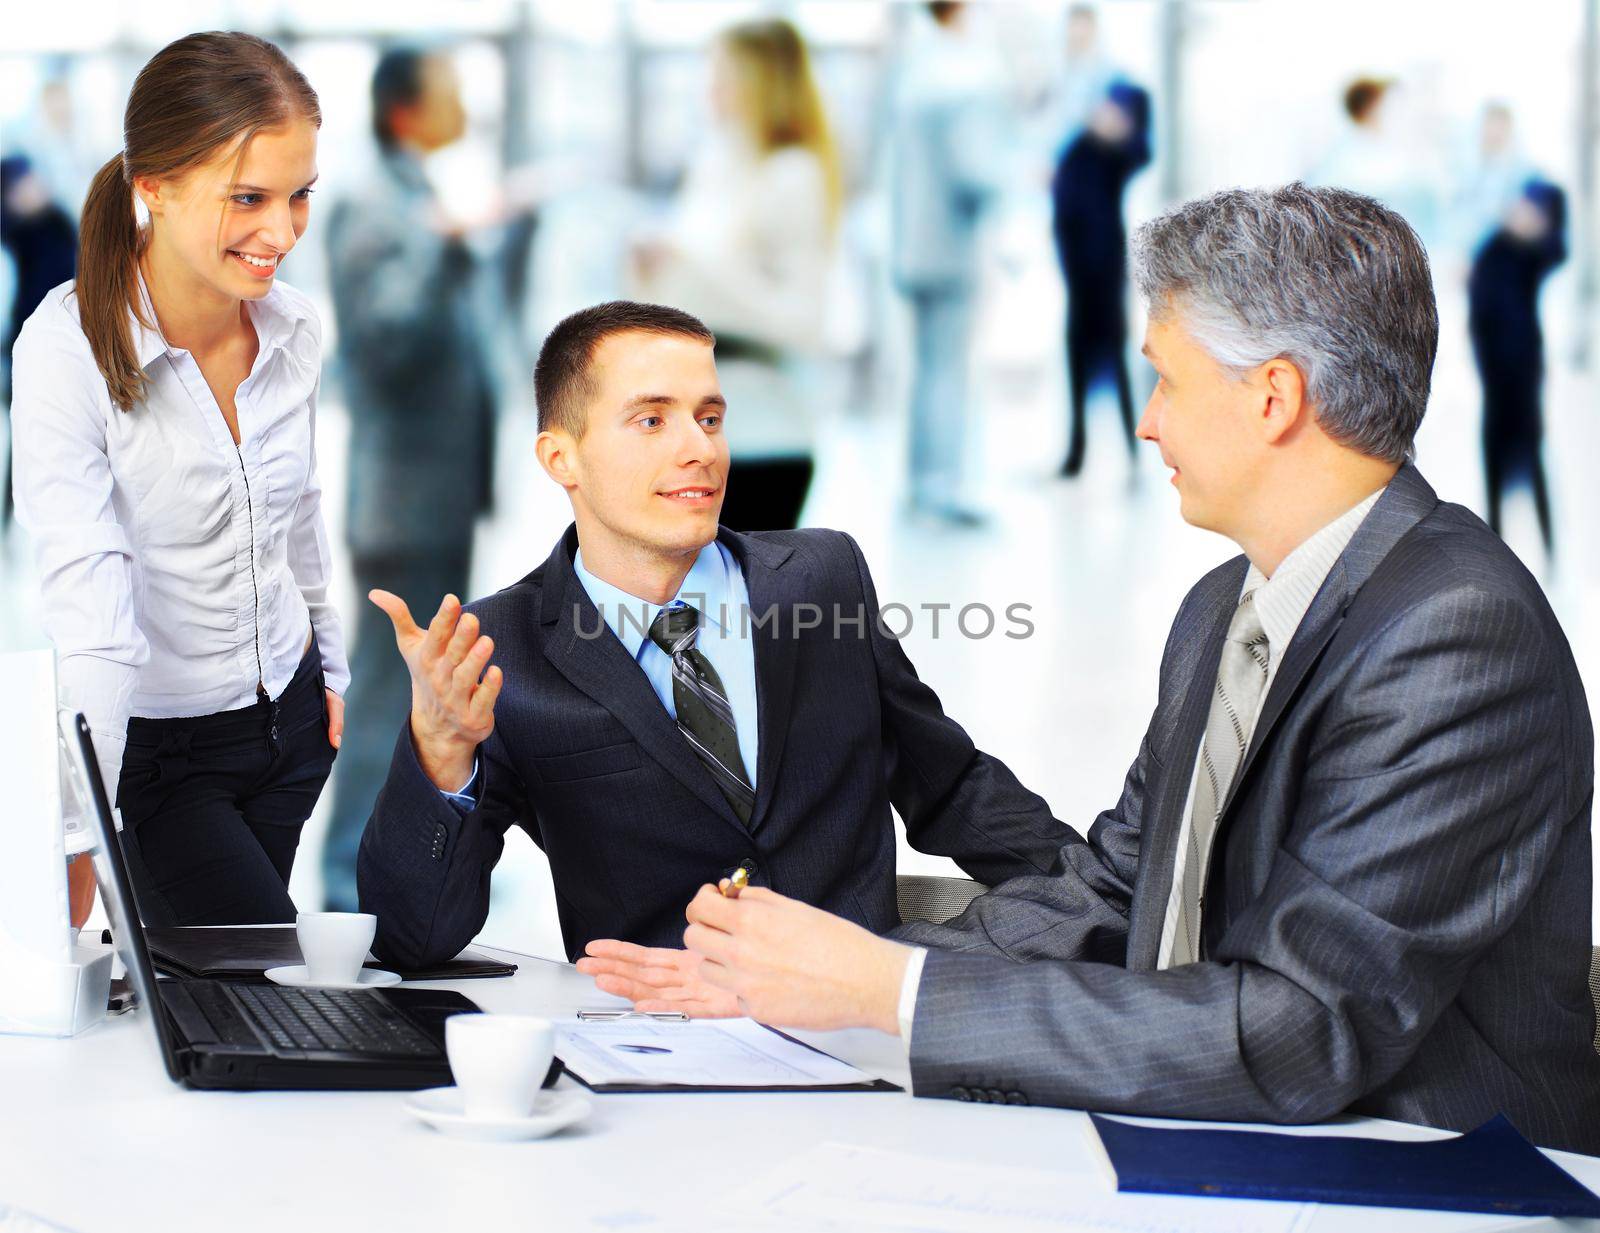 A business team sitting in office and planning work